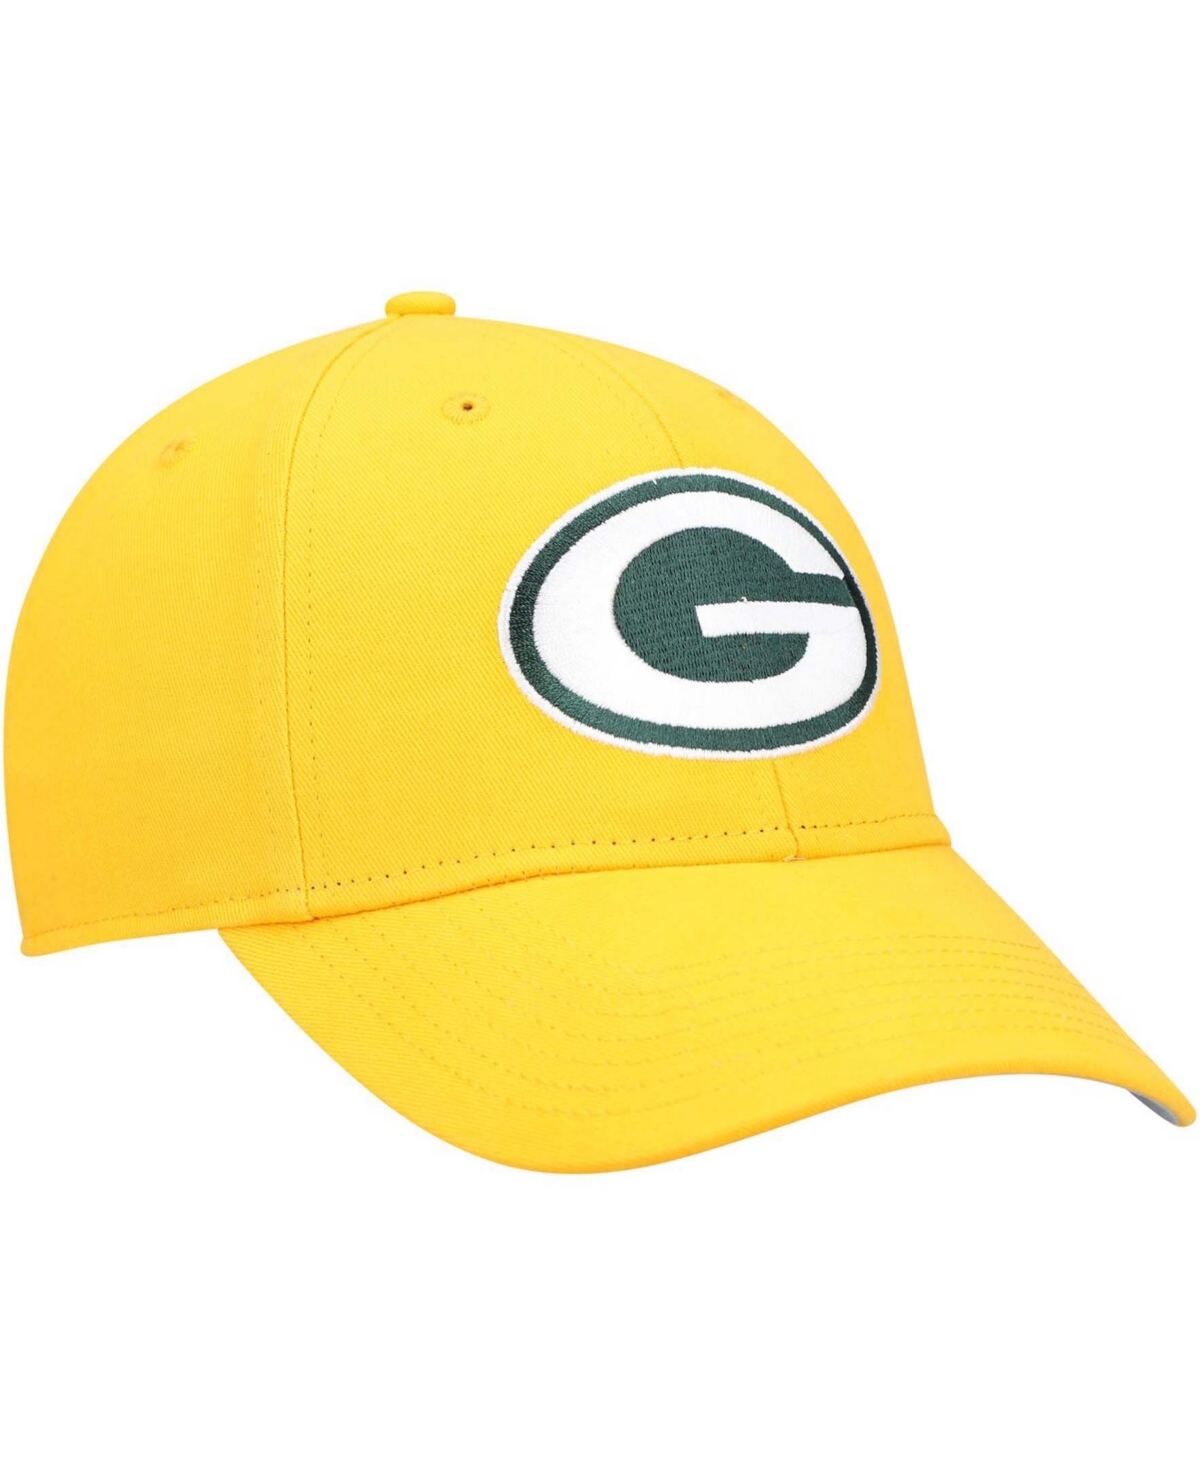 Shop 47 Brand Boys Gold Green Bay Packers Basic Secondary Mvp Adjustable Hat